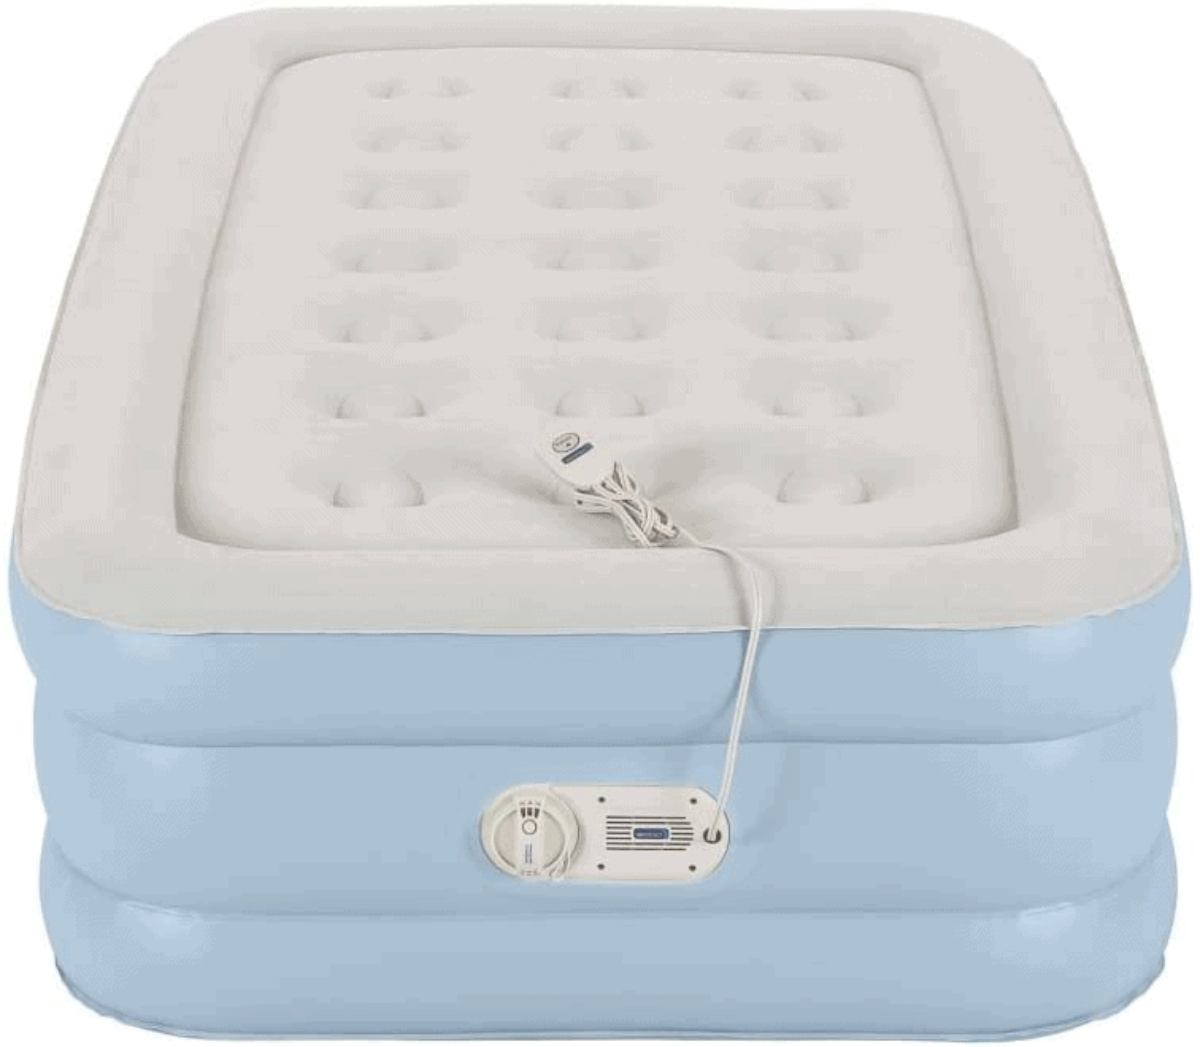 What Is The Surprising Trick To Plug An Air Mattress Without A Plug?